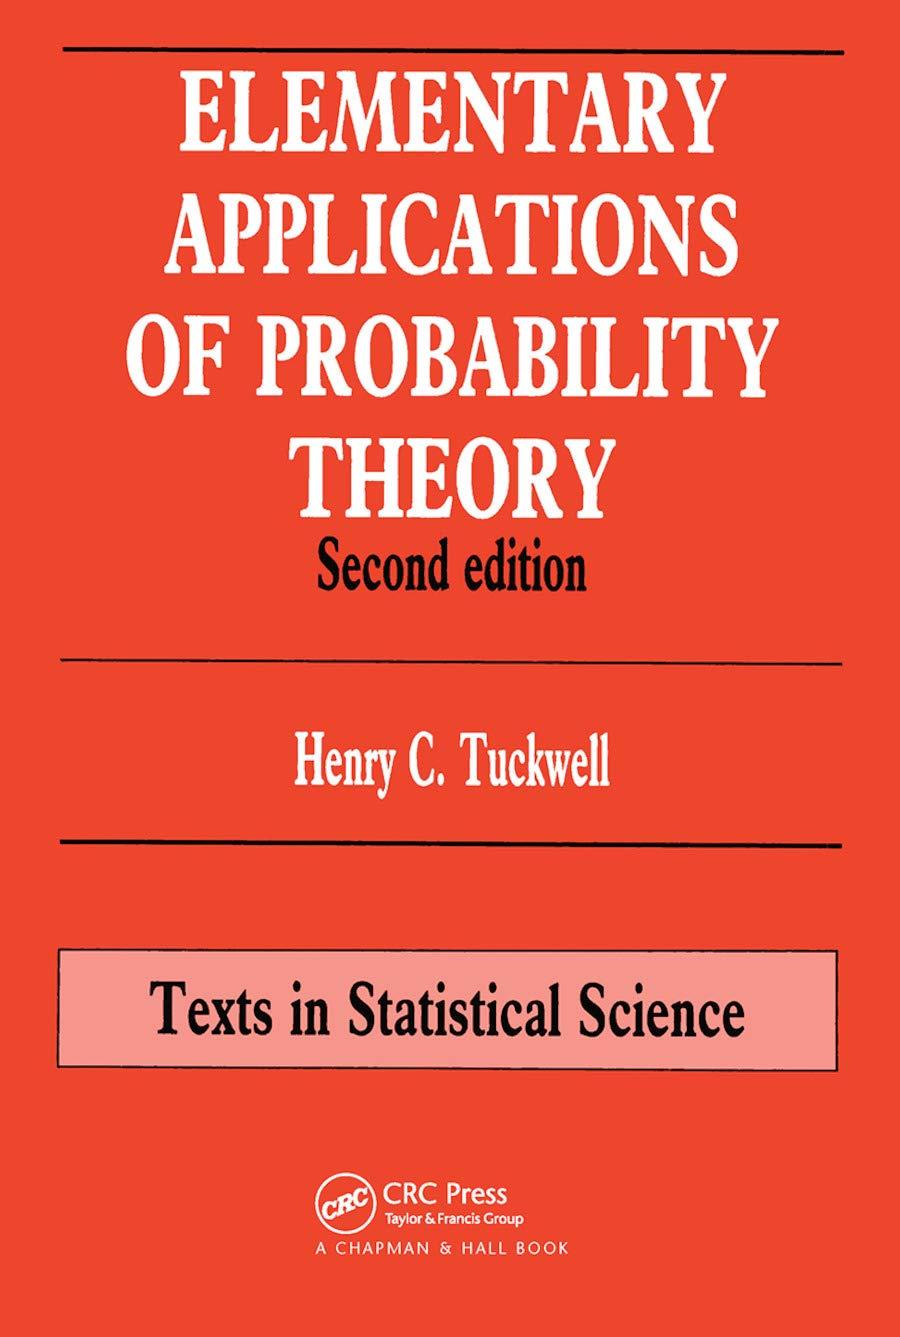 elementary applications of probability theory 2nd edition henry c. tuckwell 0367449056, 9780367449056